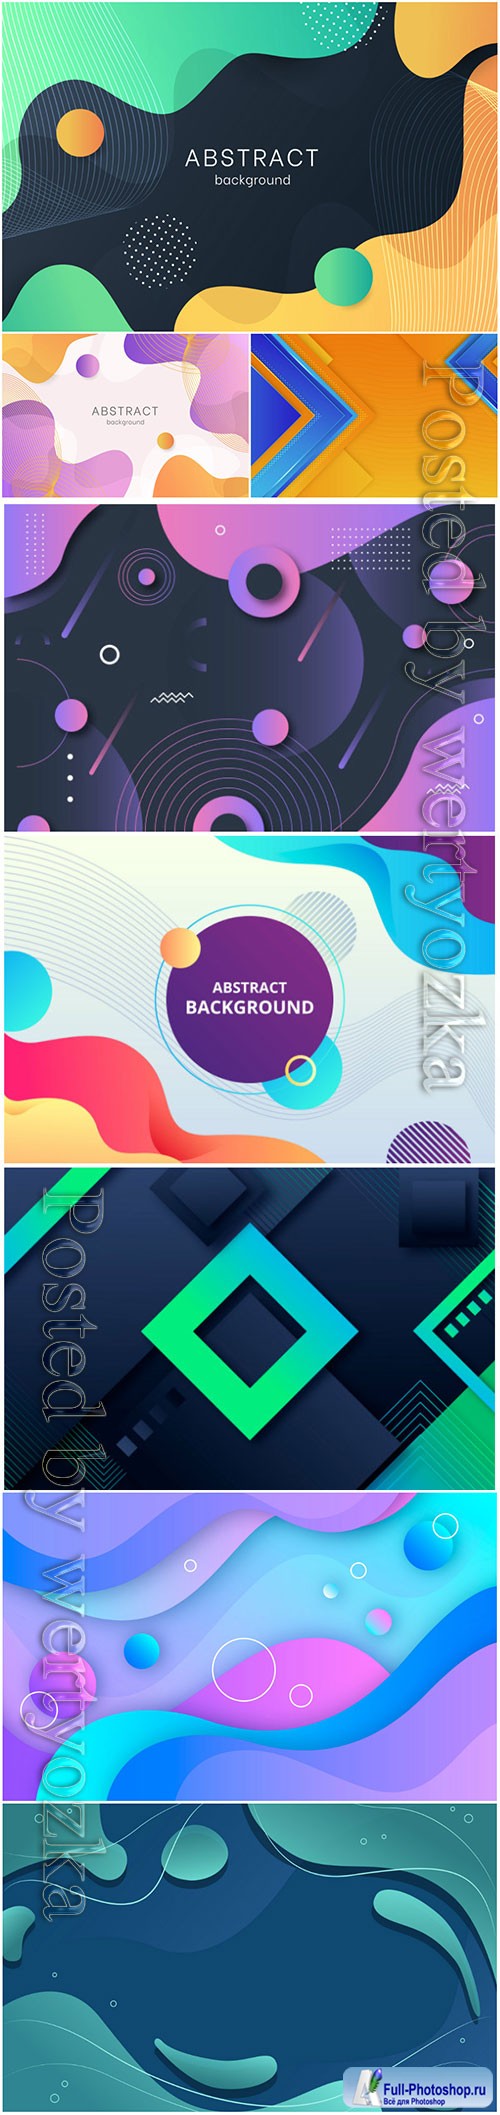 Luxury abstract backgrounds in vector # 3